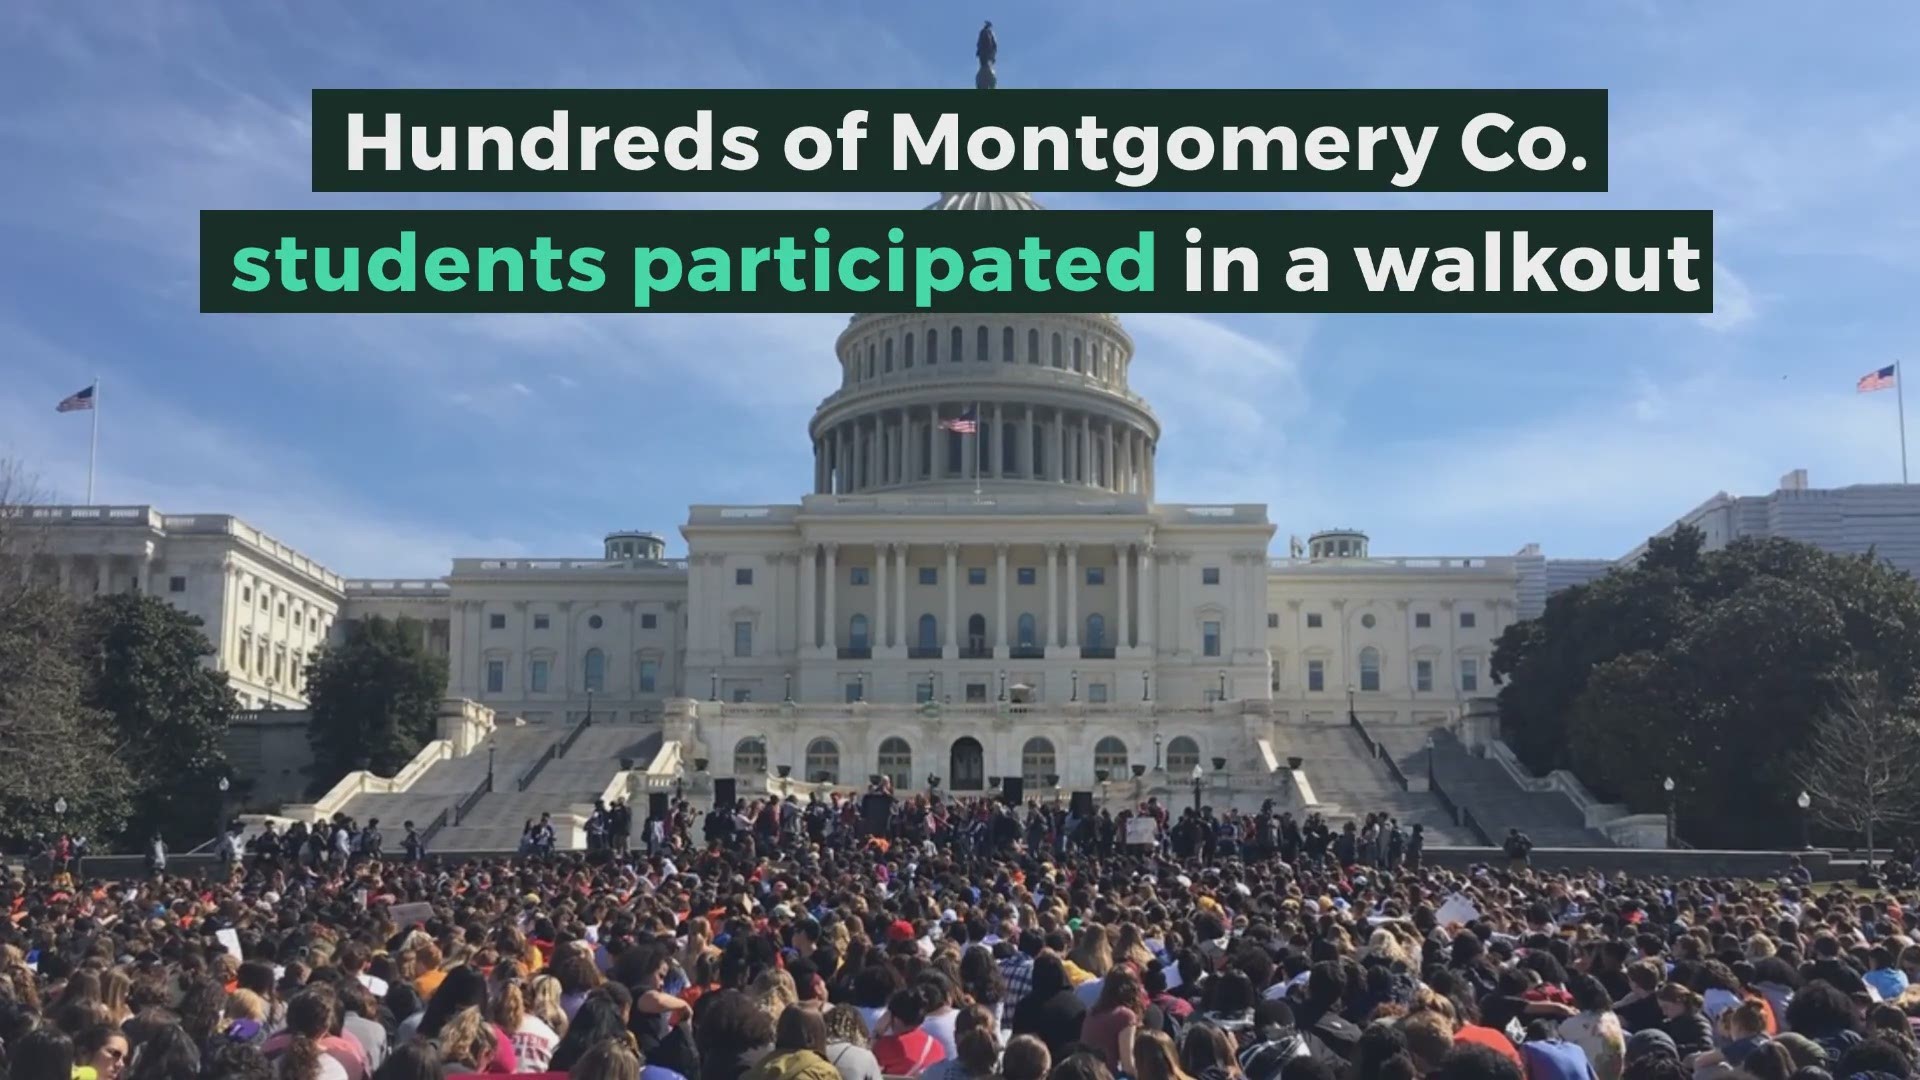 Students from Montgomery Co. who participated in a walkout for stricter gun laws said “This is not a moment. This is a movement.”